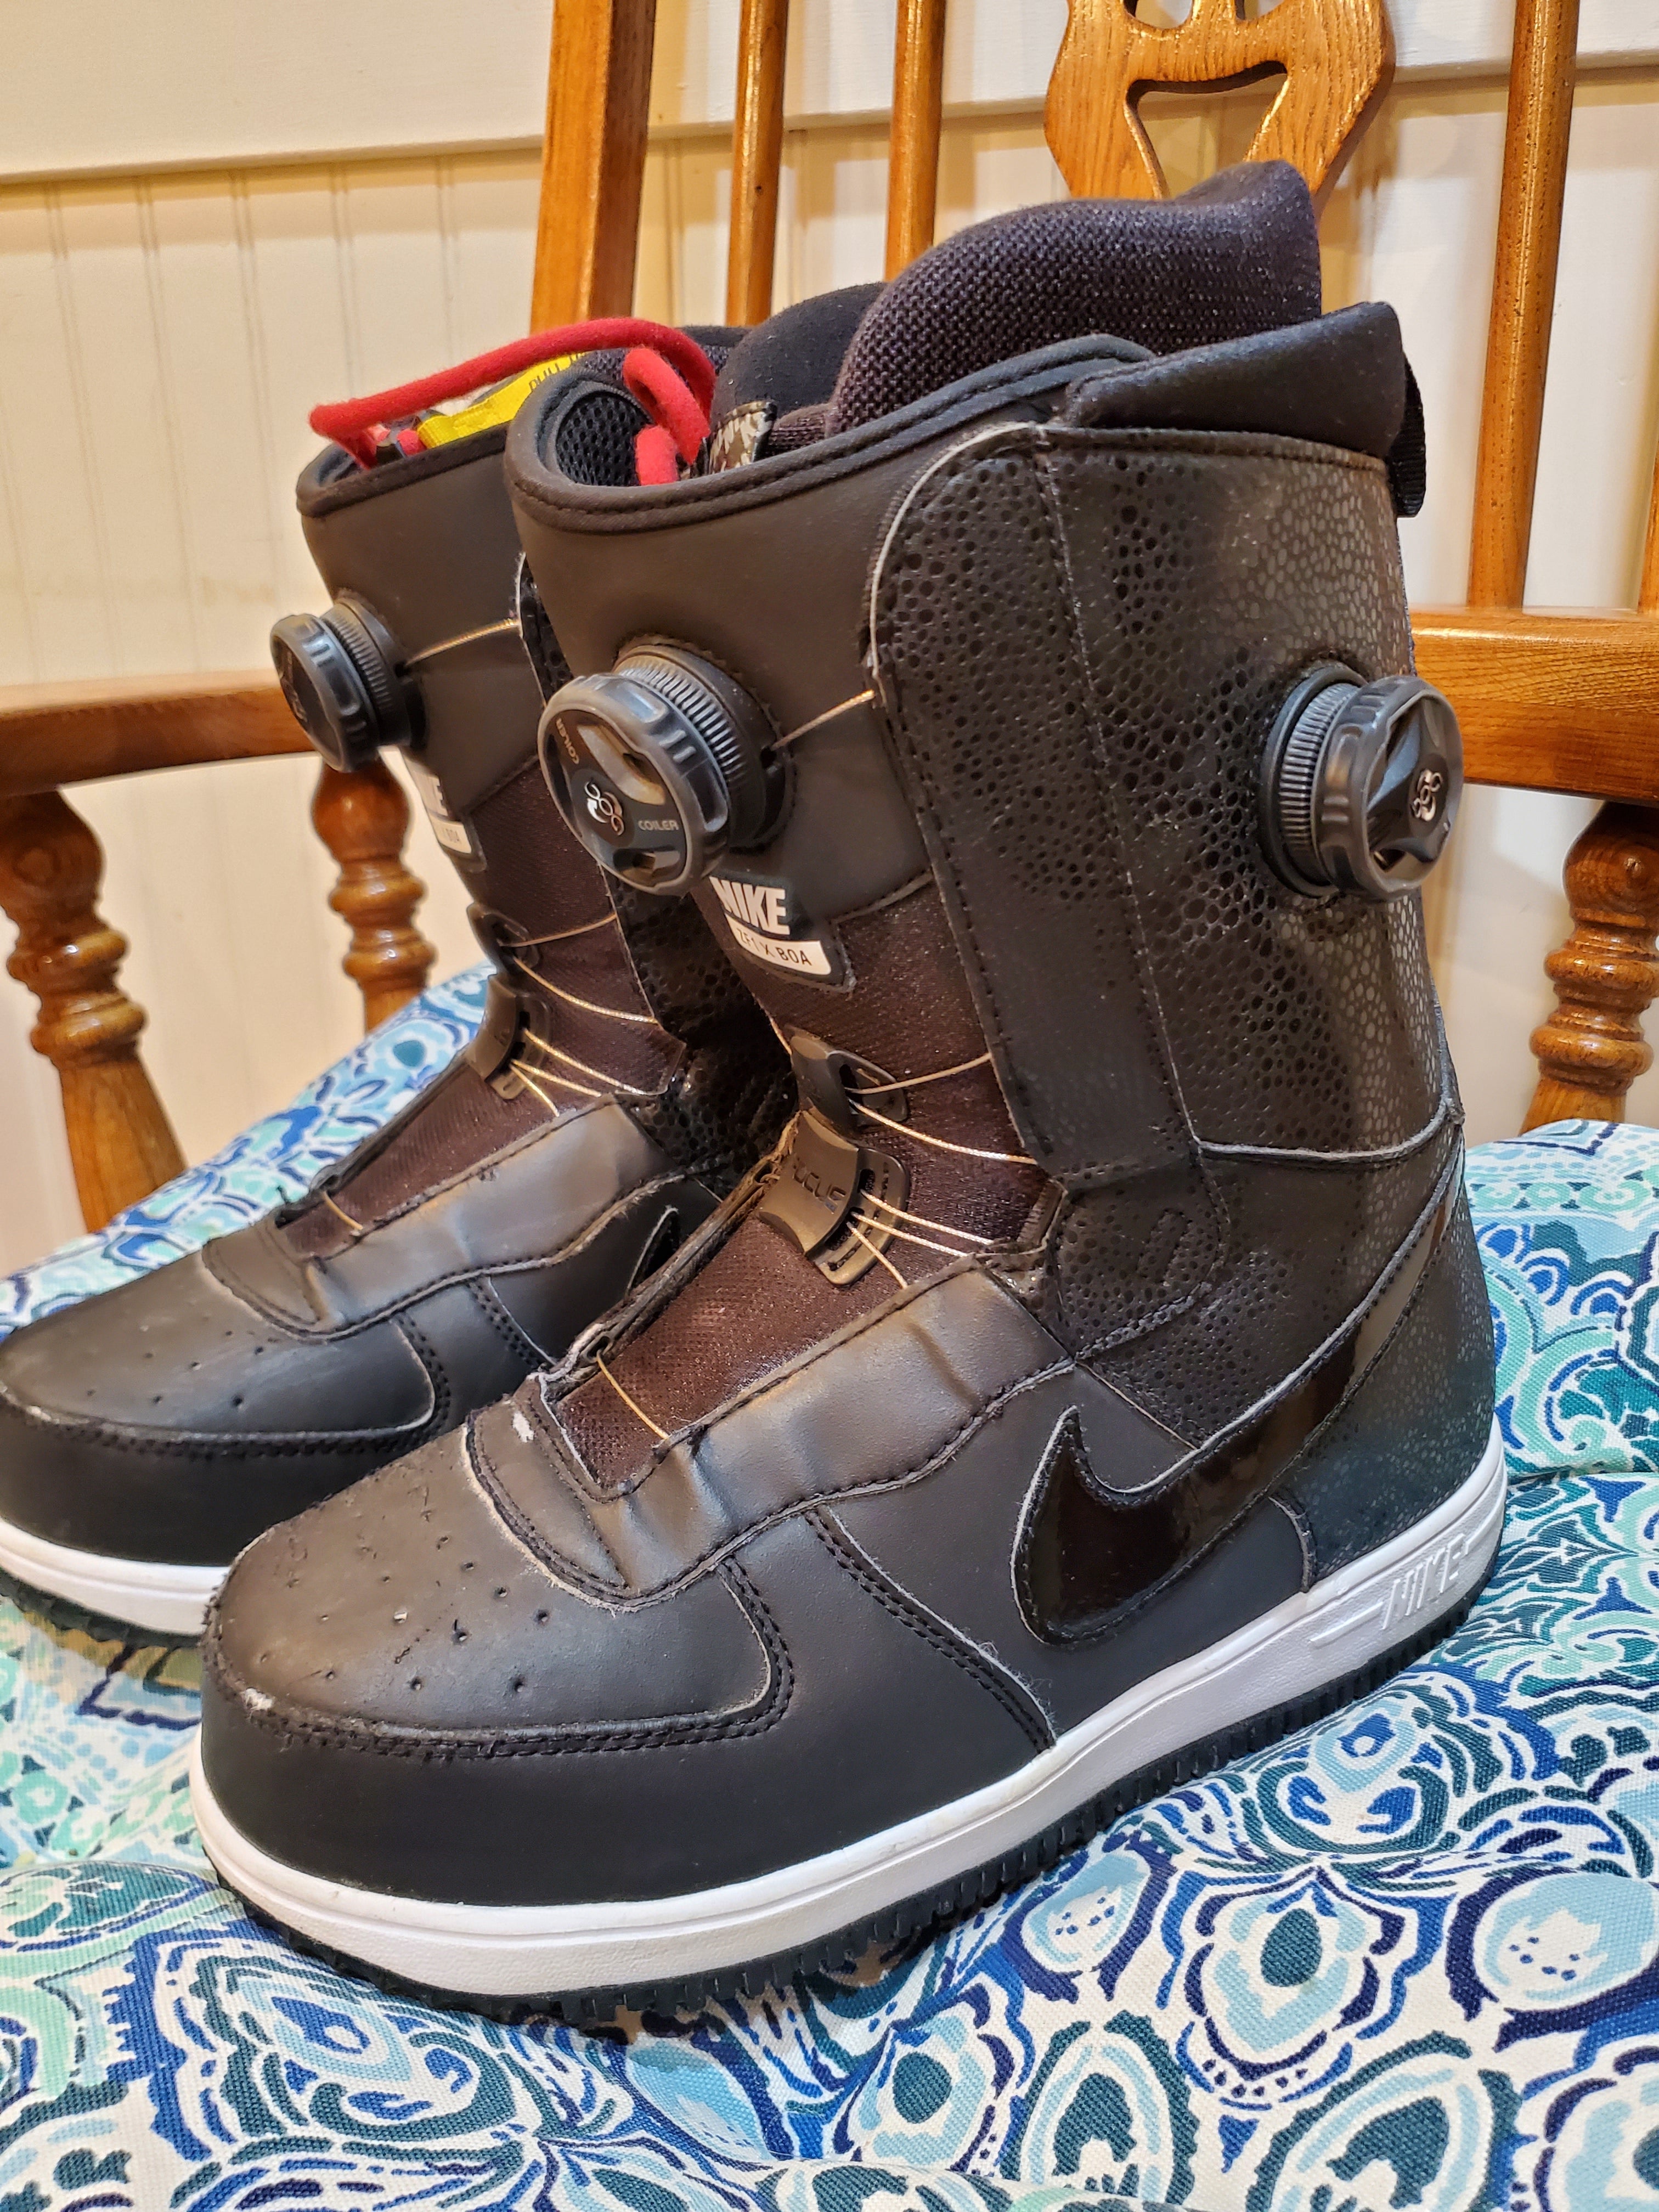 Nike Zoom Force 1 Snowboard Boots for sale | New and Used on